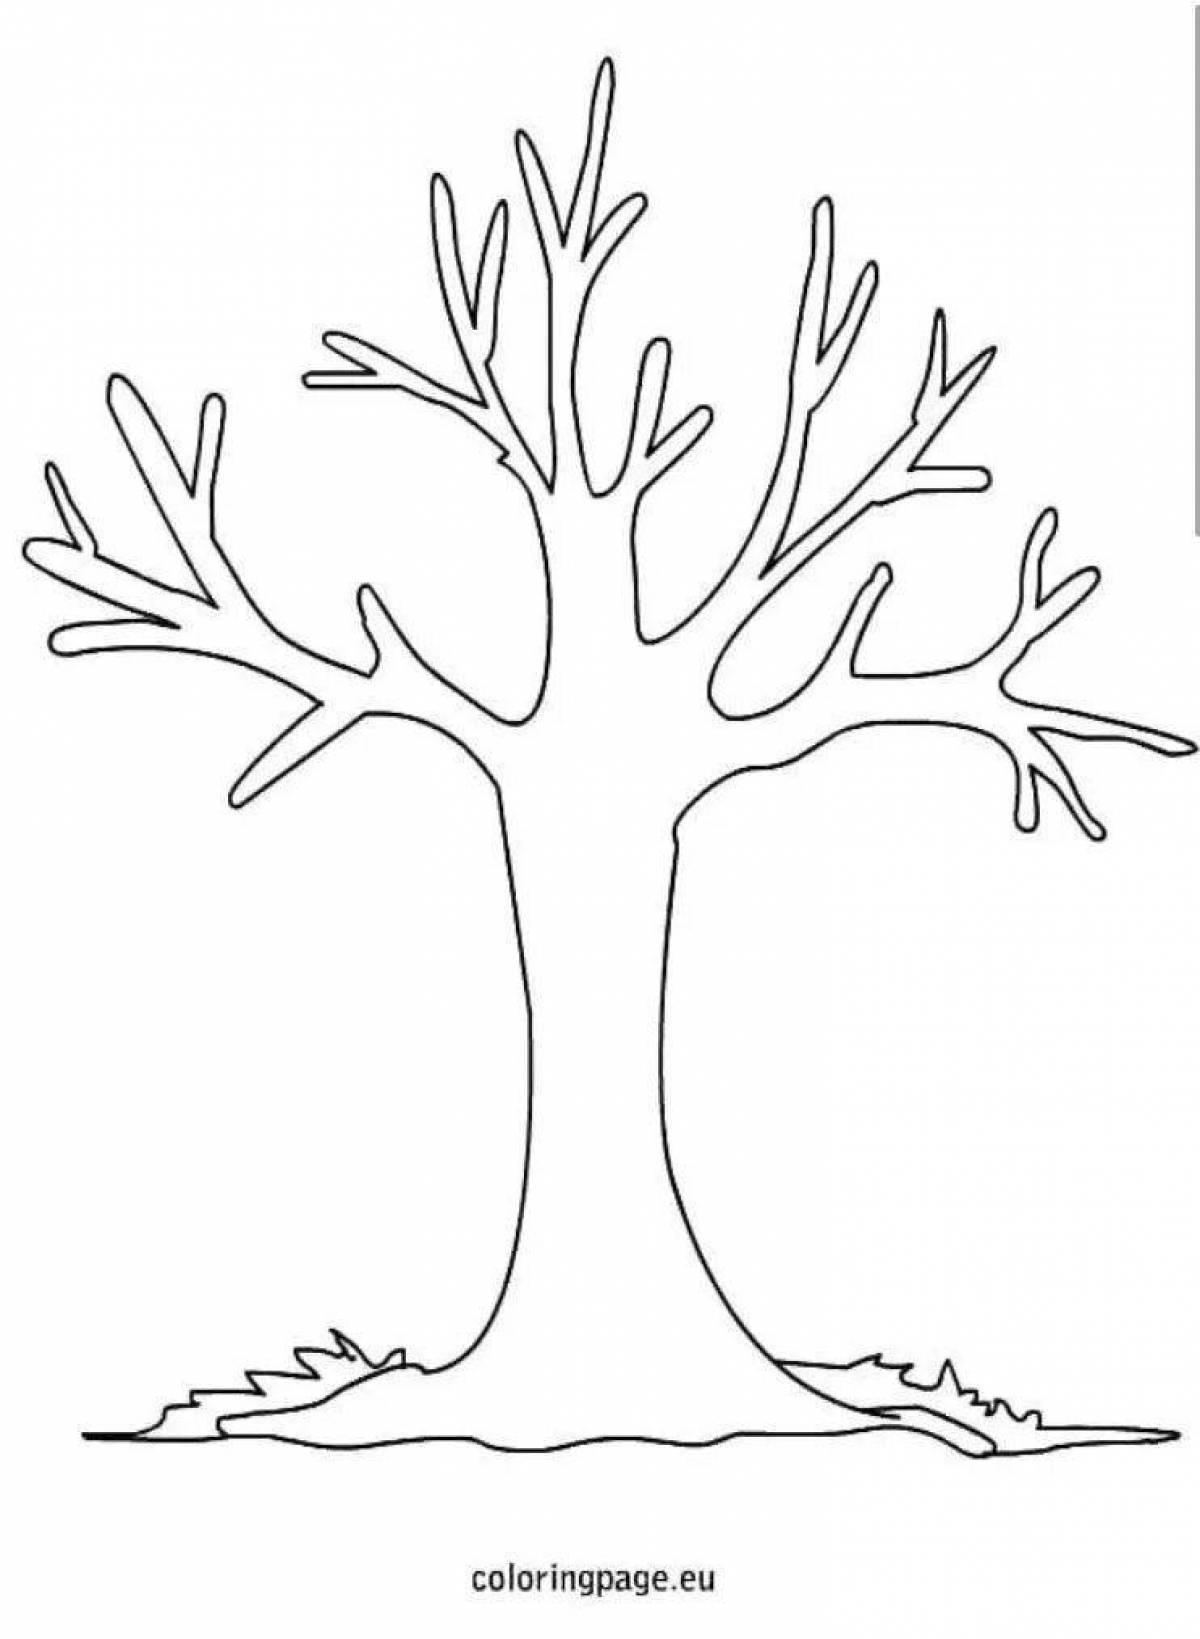 Joyful tree without leaves for children 3-4 years old